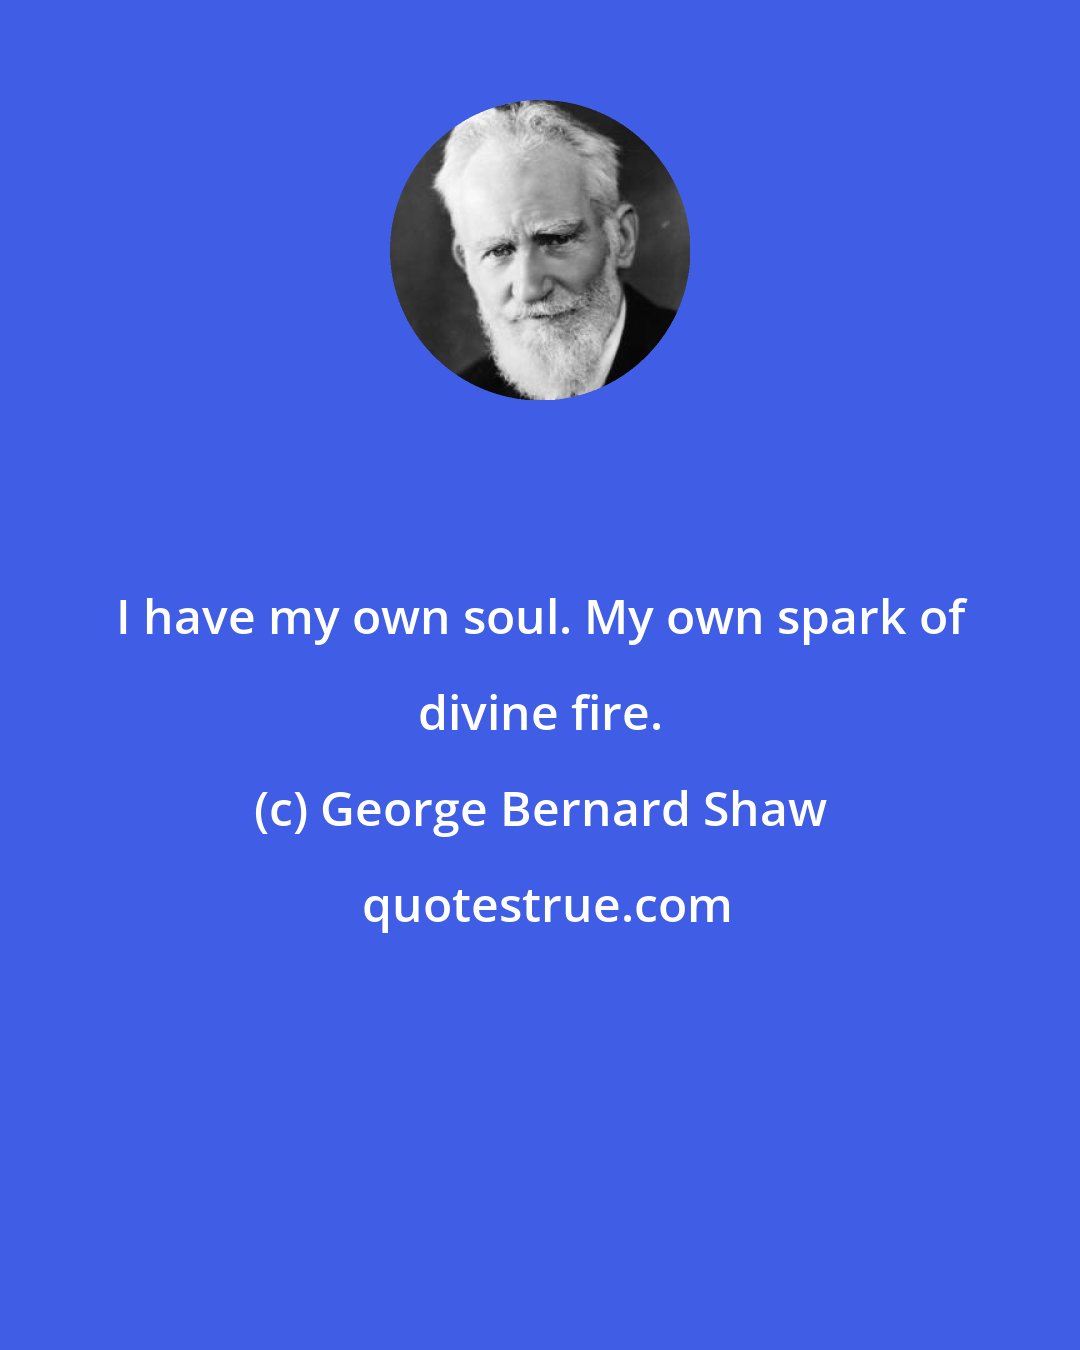 George Bernard Shaw: I have my own soul. My own spark of divine fire.